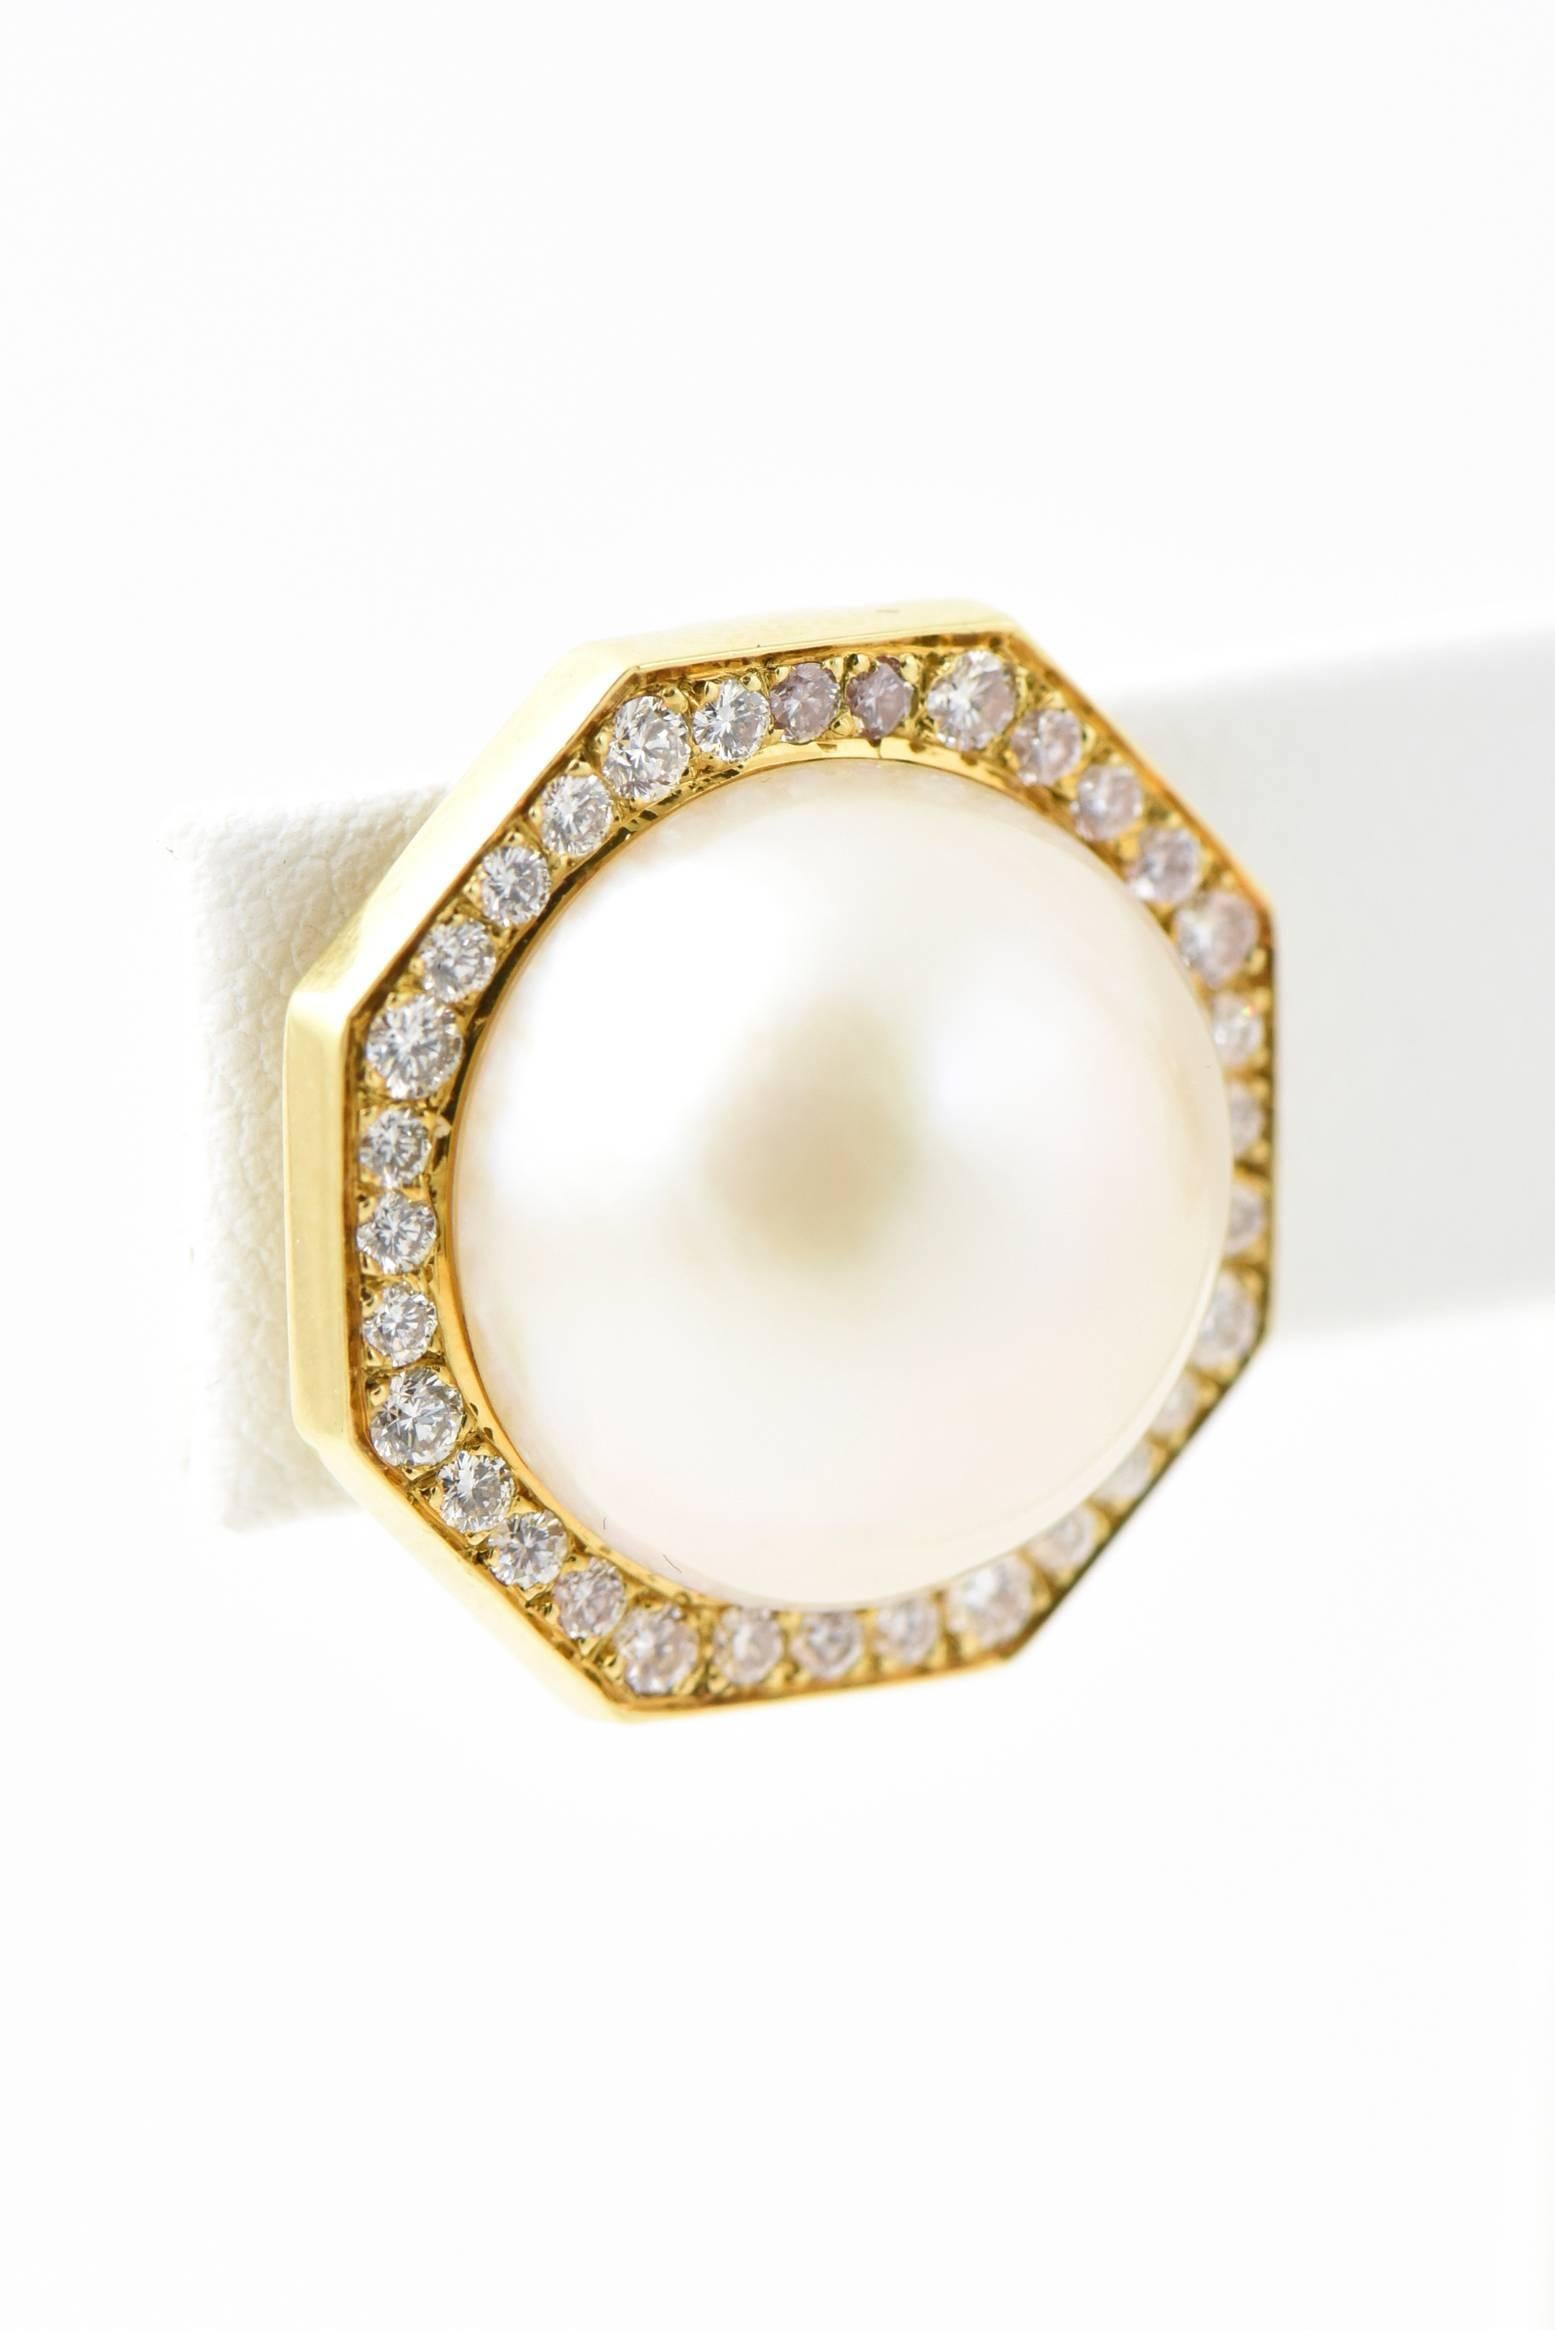 Finely made Italian ear clip earrings made by Cellino. These octagon earrings feature a round mabe pearl center in a high quality diamond and 18k gold frame frame.  The original backs have been replaced with a 14k gold hinged clip back that has NO